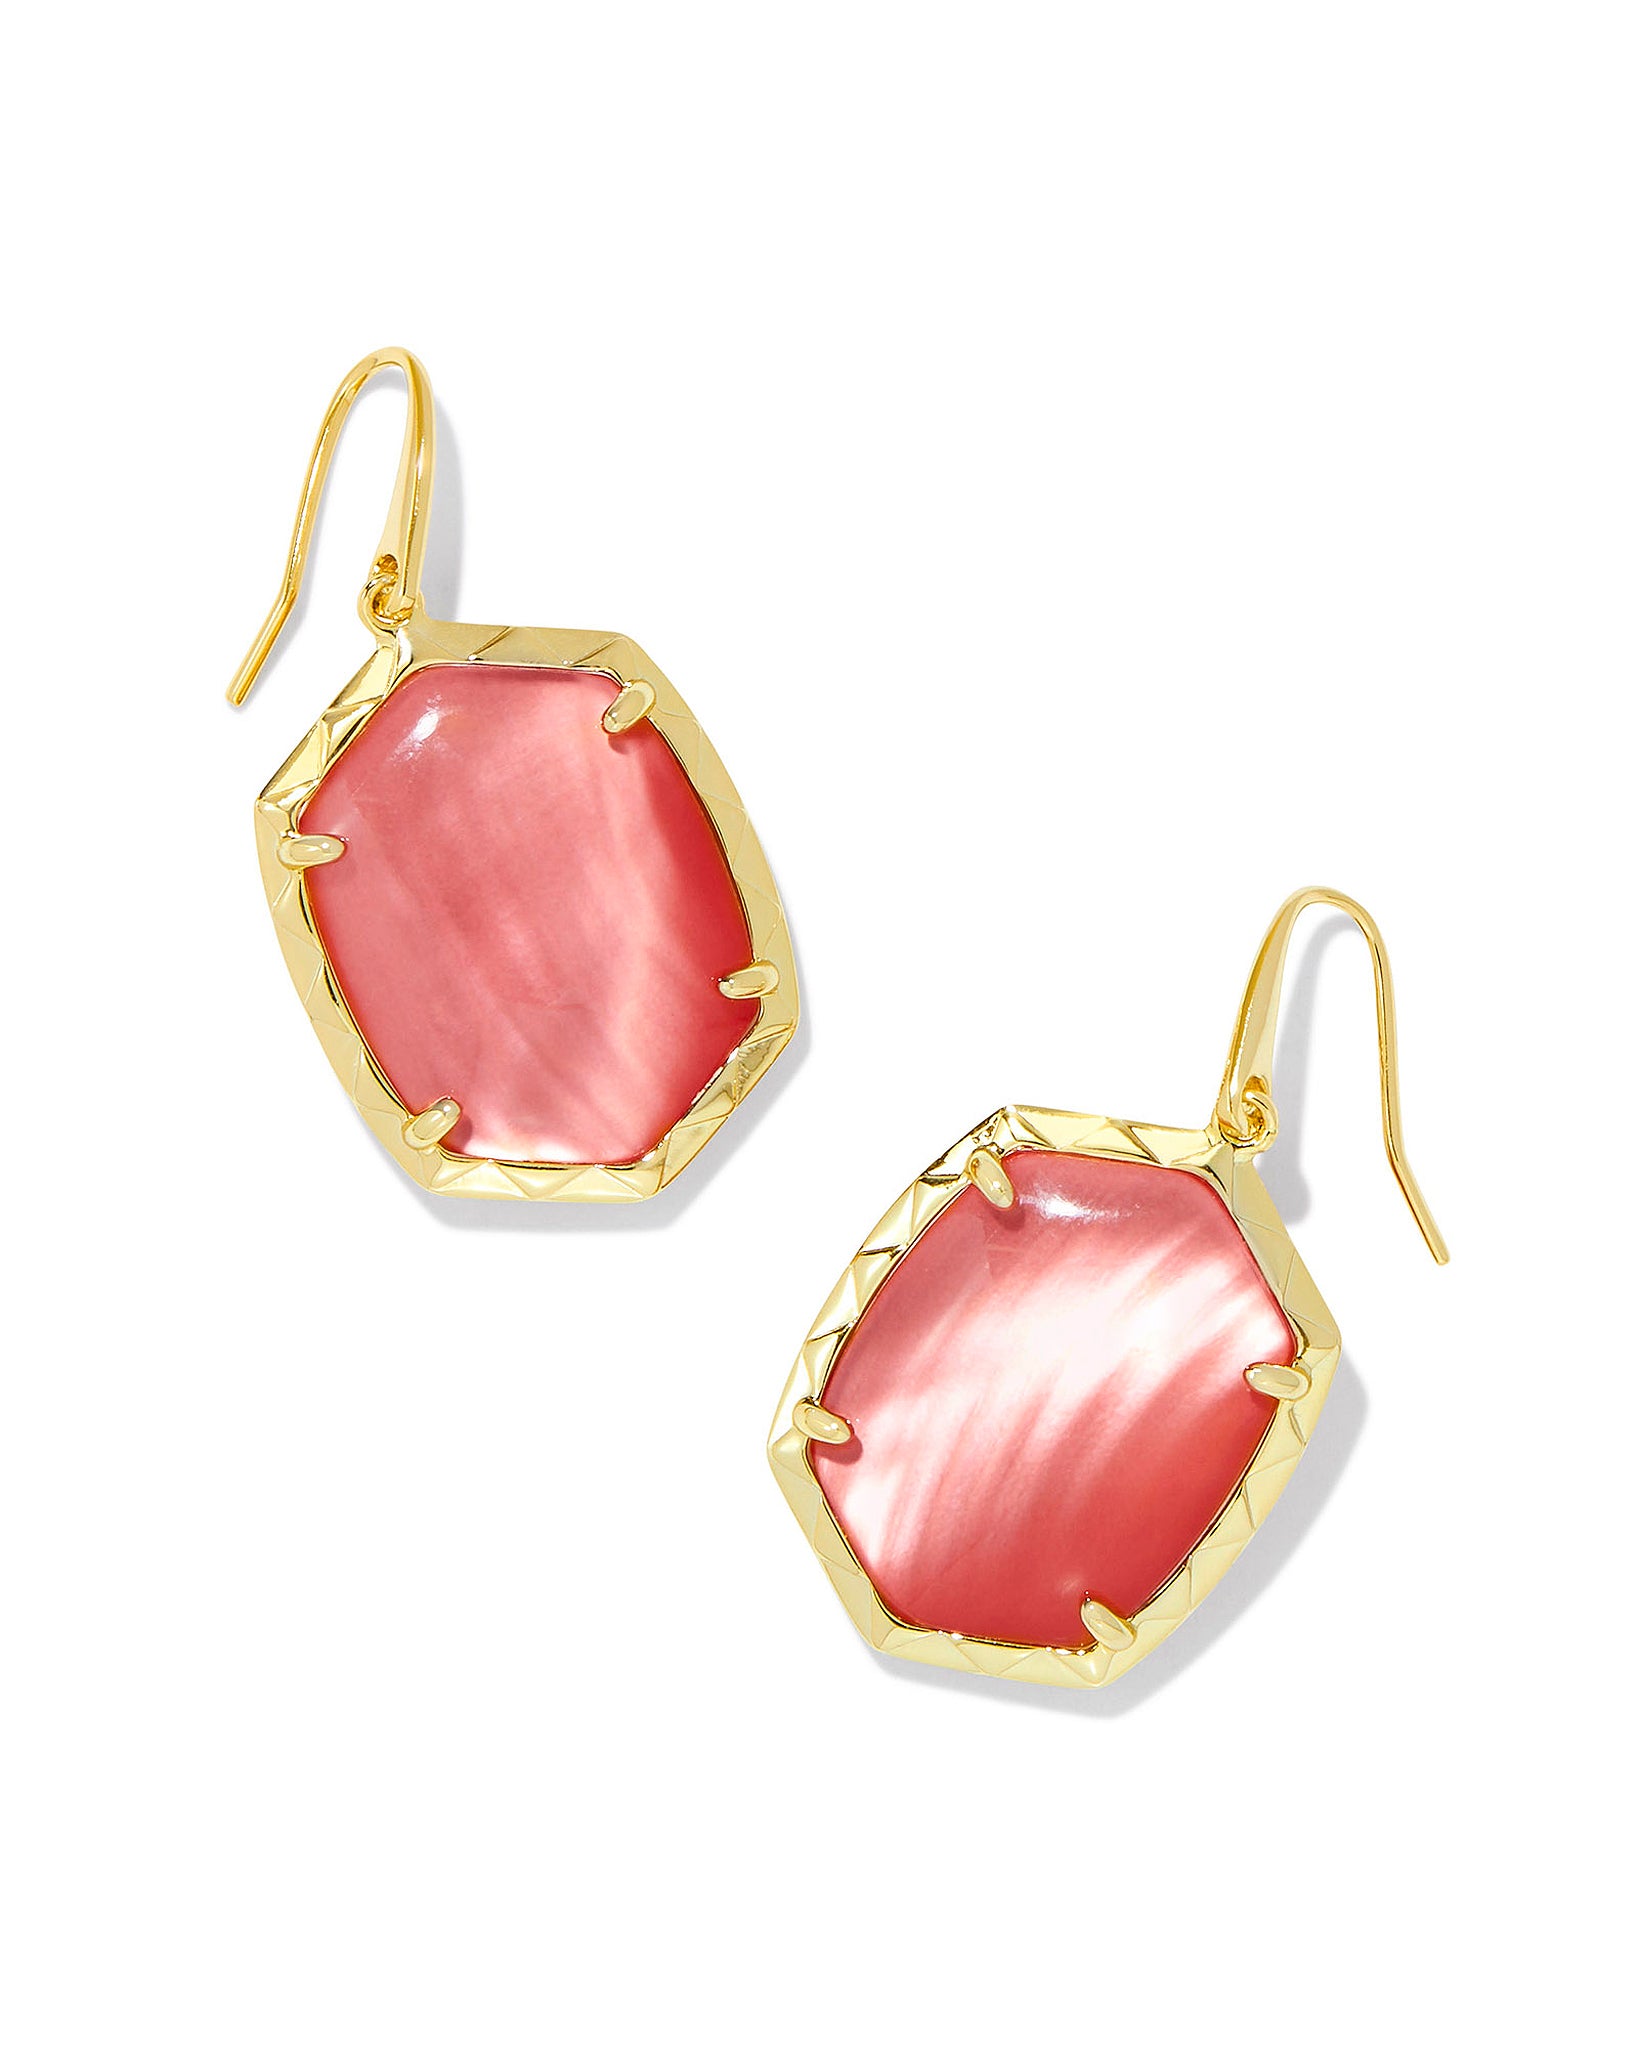 Kendra Scott Daphne Drop Earrings in Coral Pink Mother of Pearl and Gold